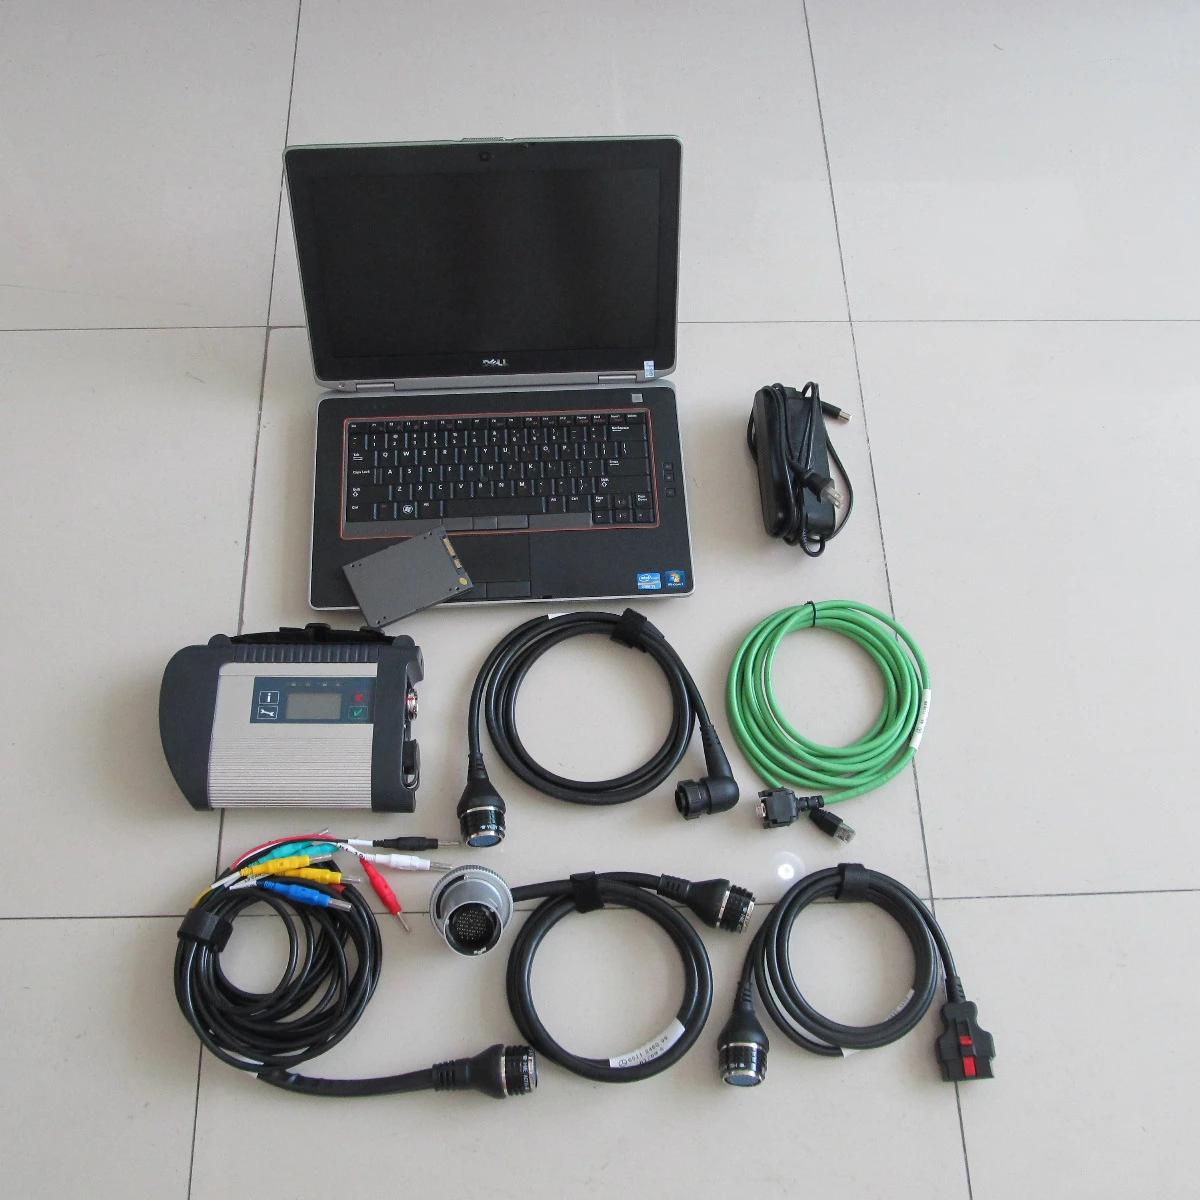 

2021.03v software Win7 system ssd full set mb star c4 sd connect with mb sd C4 e6420 laptop i5cpu Diagnostic Tool ready to work